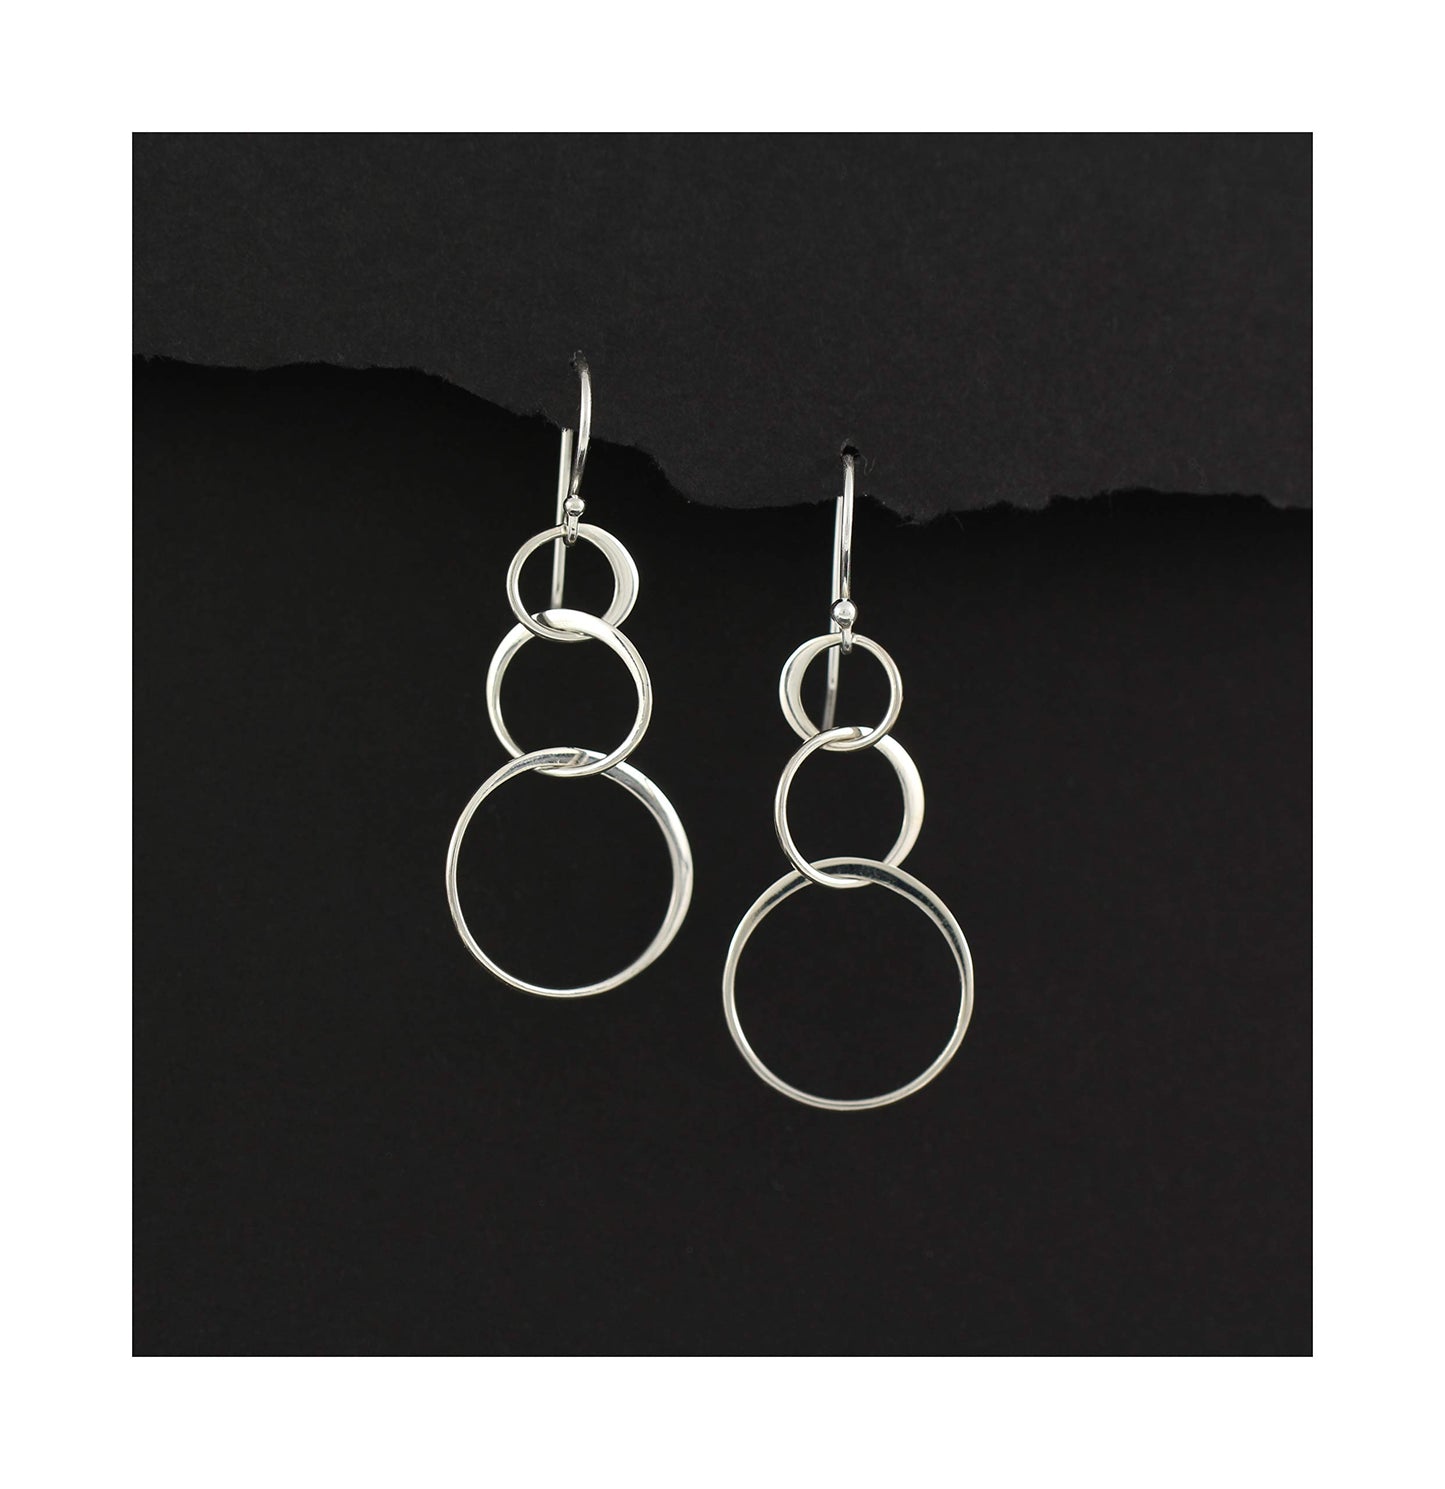 Sterling Silver 3 Connected Circle Earrings, Statement Earrings, Silver Earrings, Long Earrings, Hoop Earrings, Dangle Drop Earrings, Three Rings, Geometric, Simple, Minimalist Jewelry